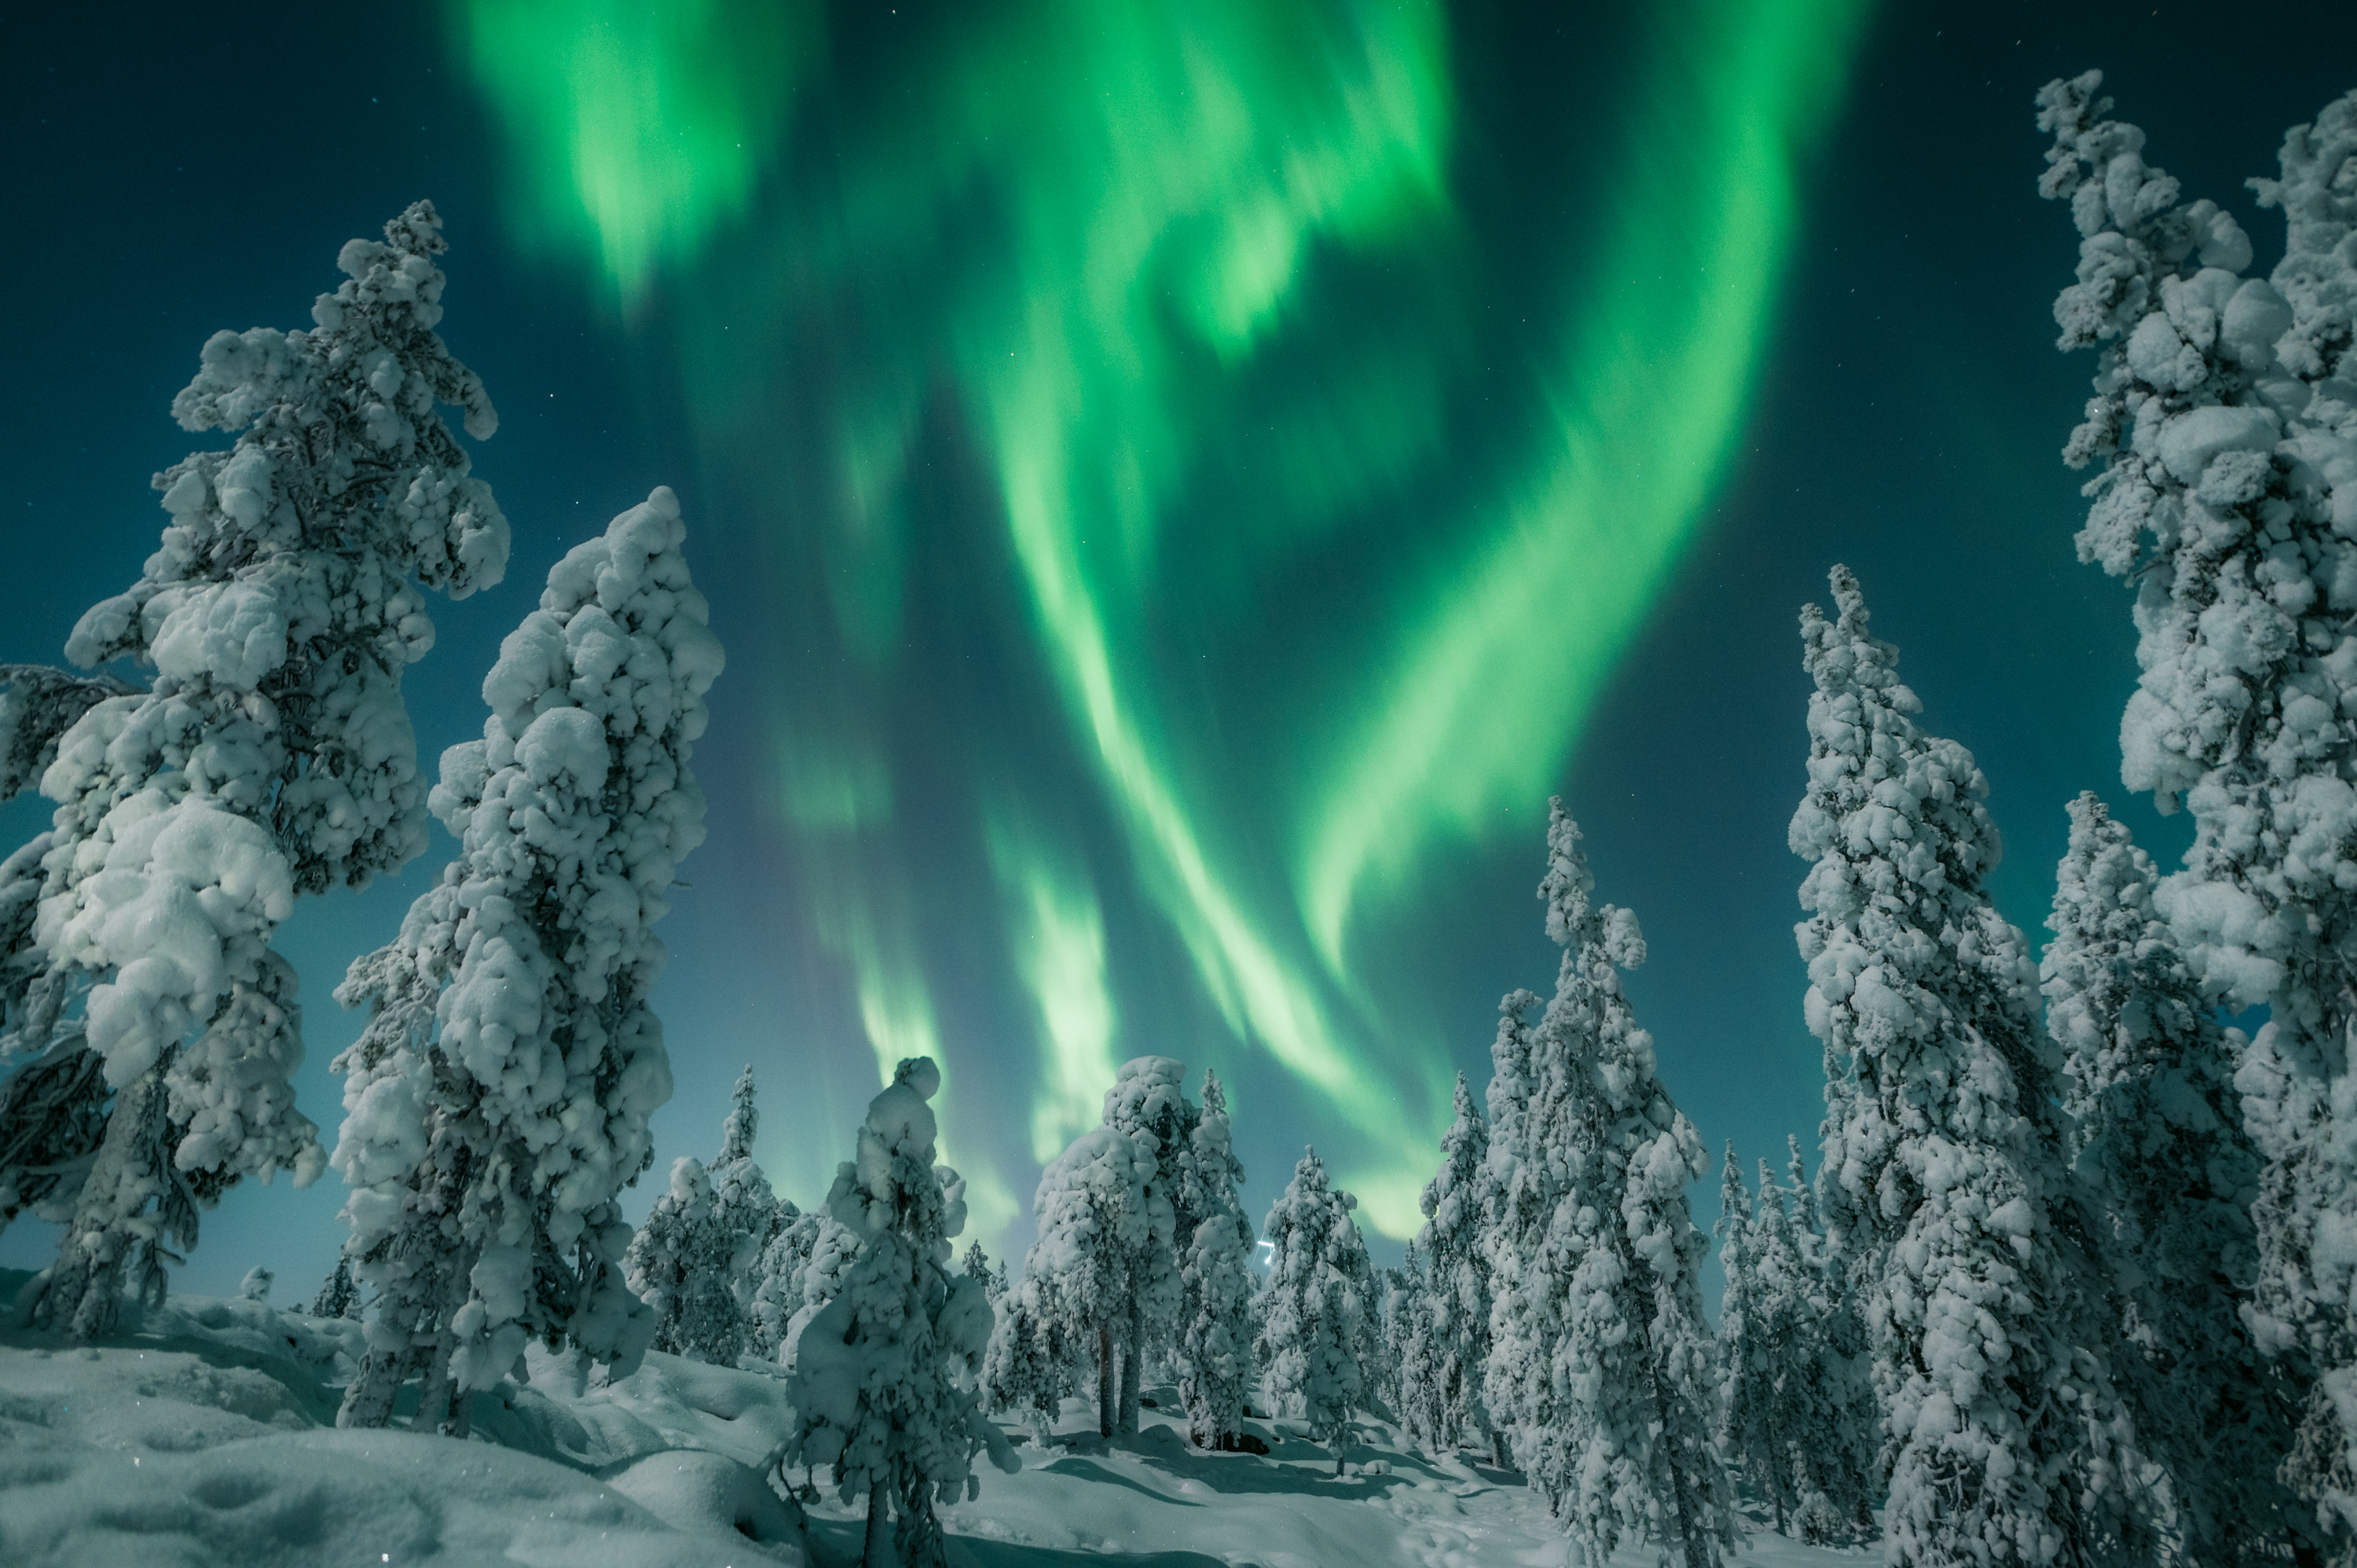 Best times to see the Northern Lights in Finland